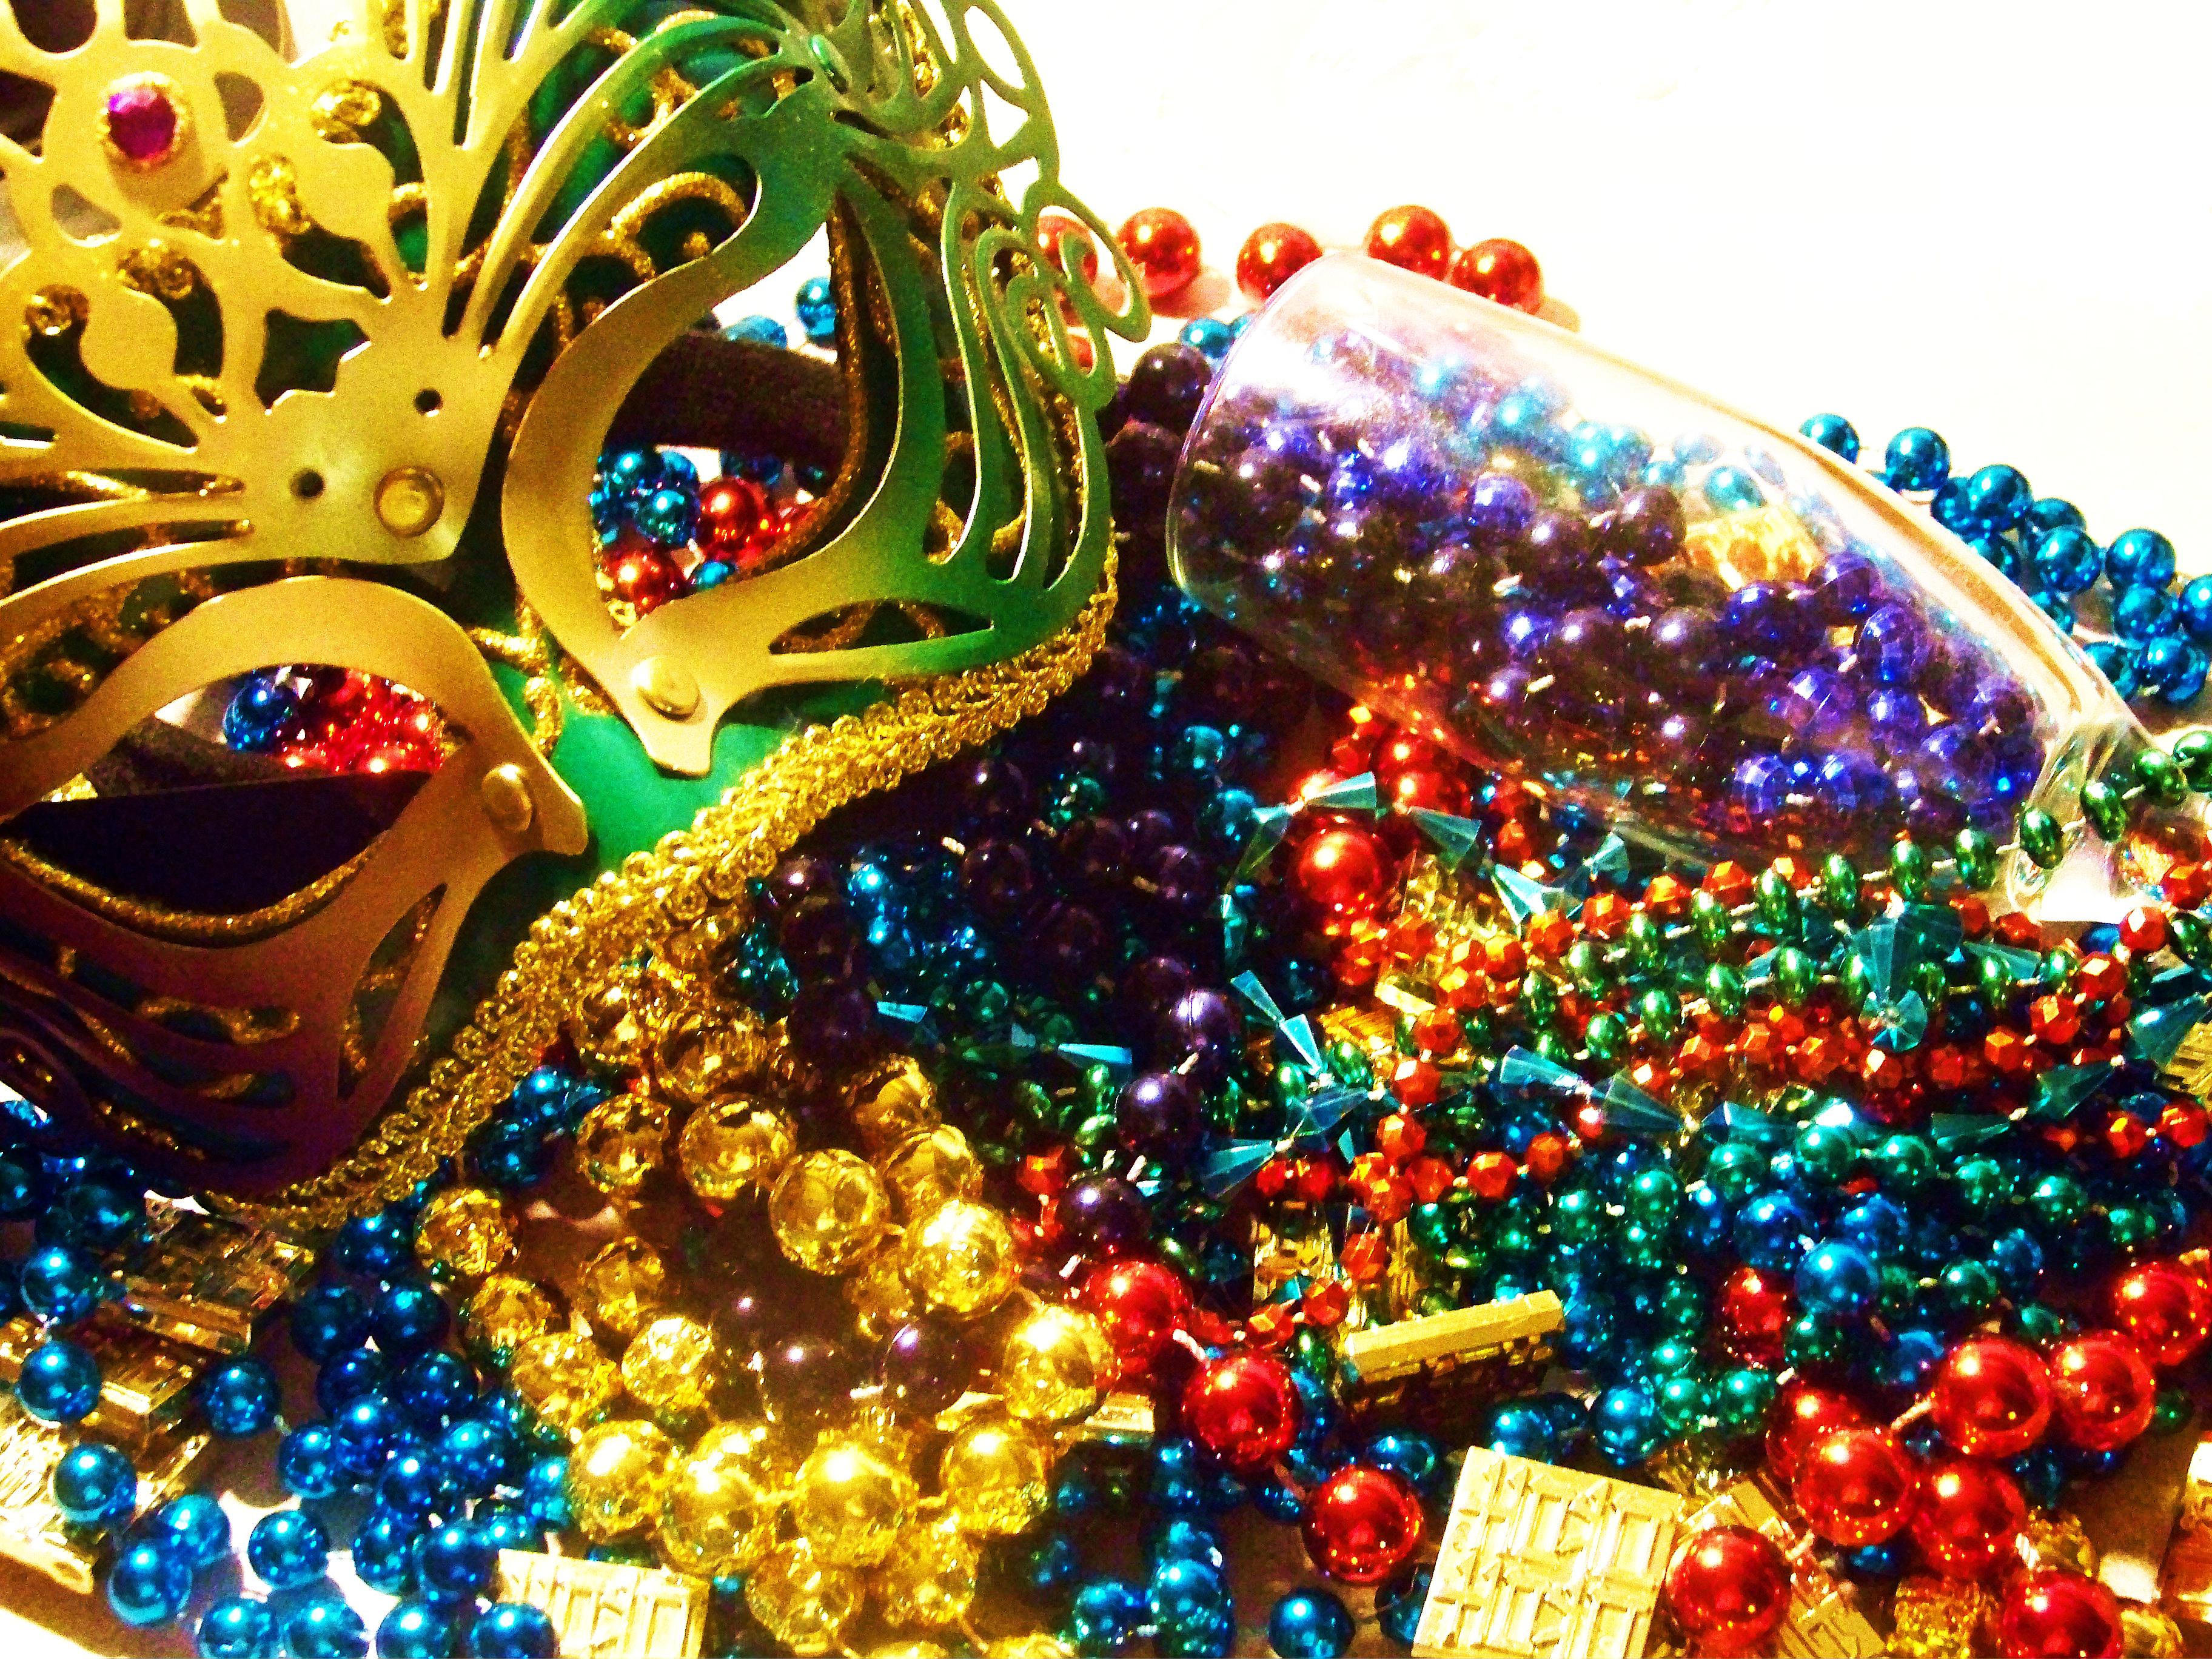 The Gifted Ferret Mardi Gras Ball with Extended Hours